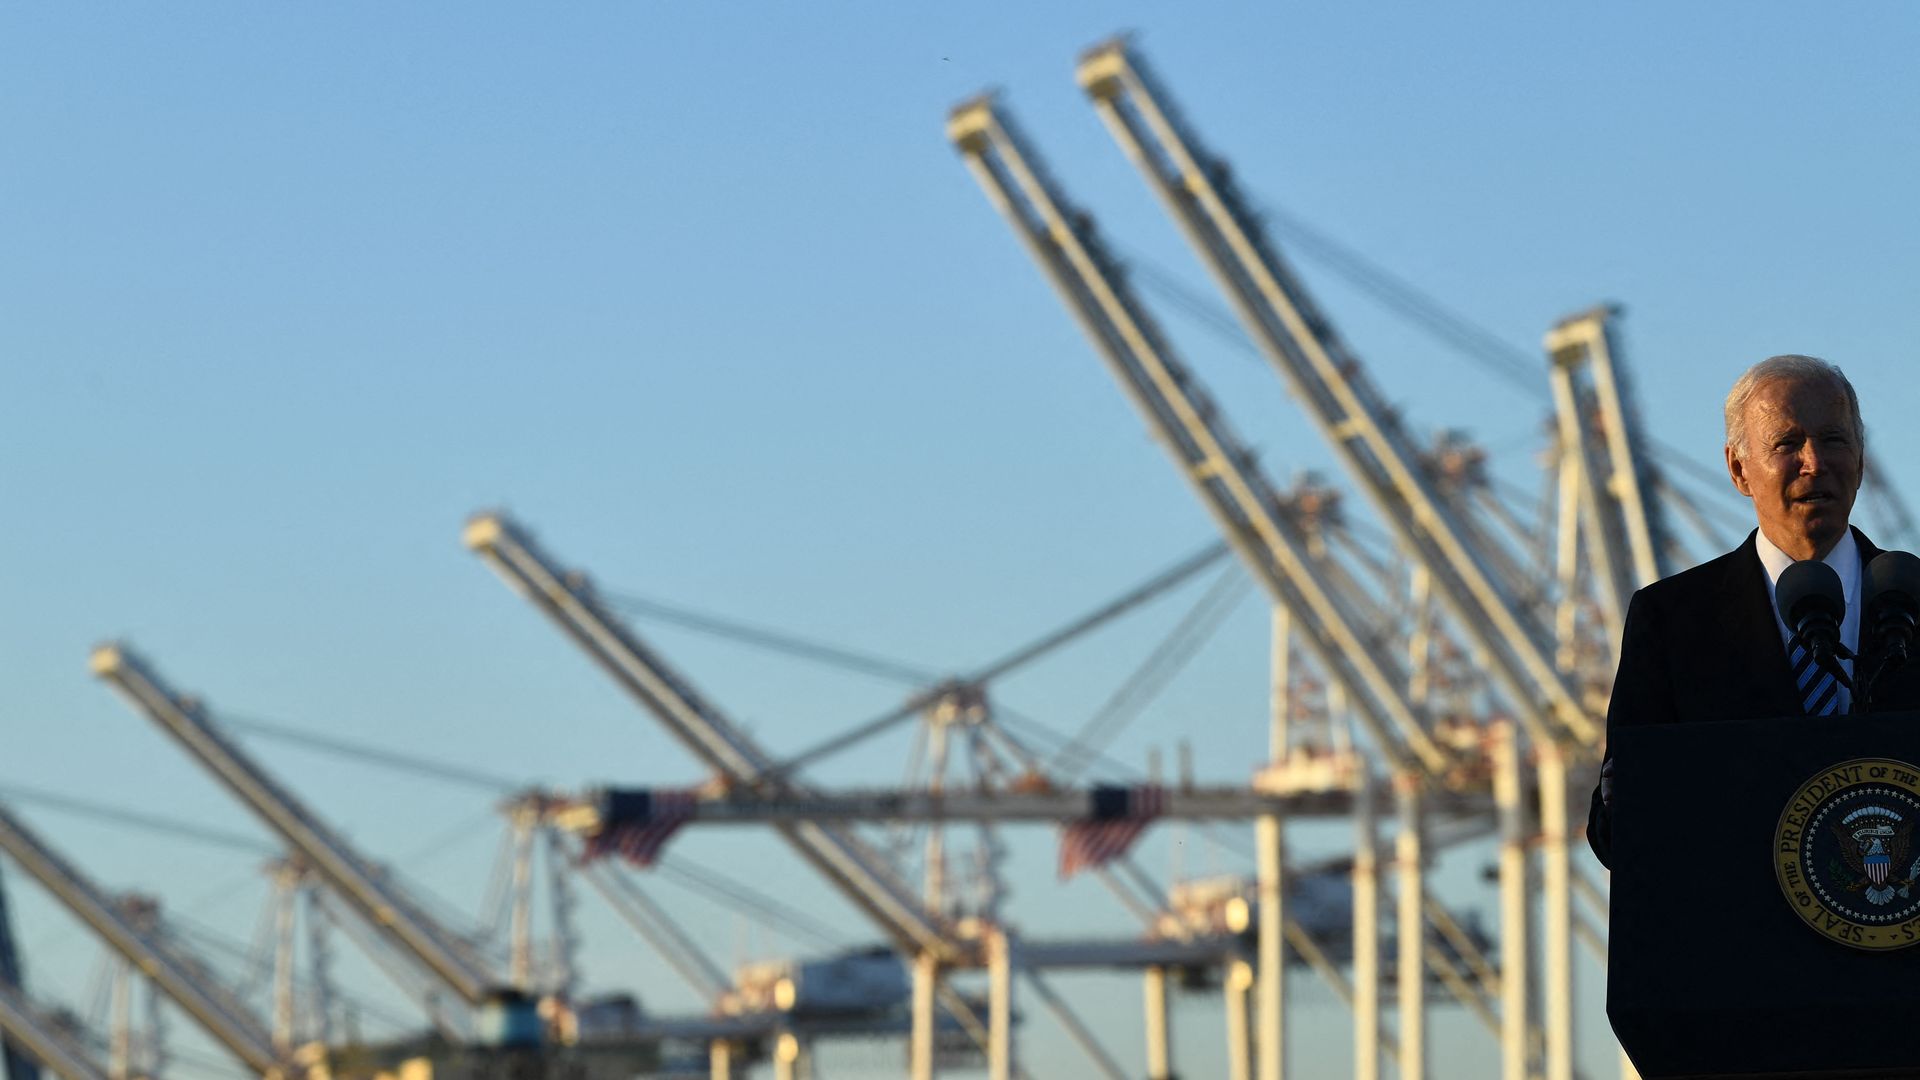 President Biden is seen speaking before cranes at the Port of Baltimore.